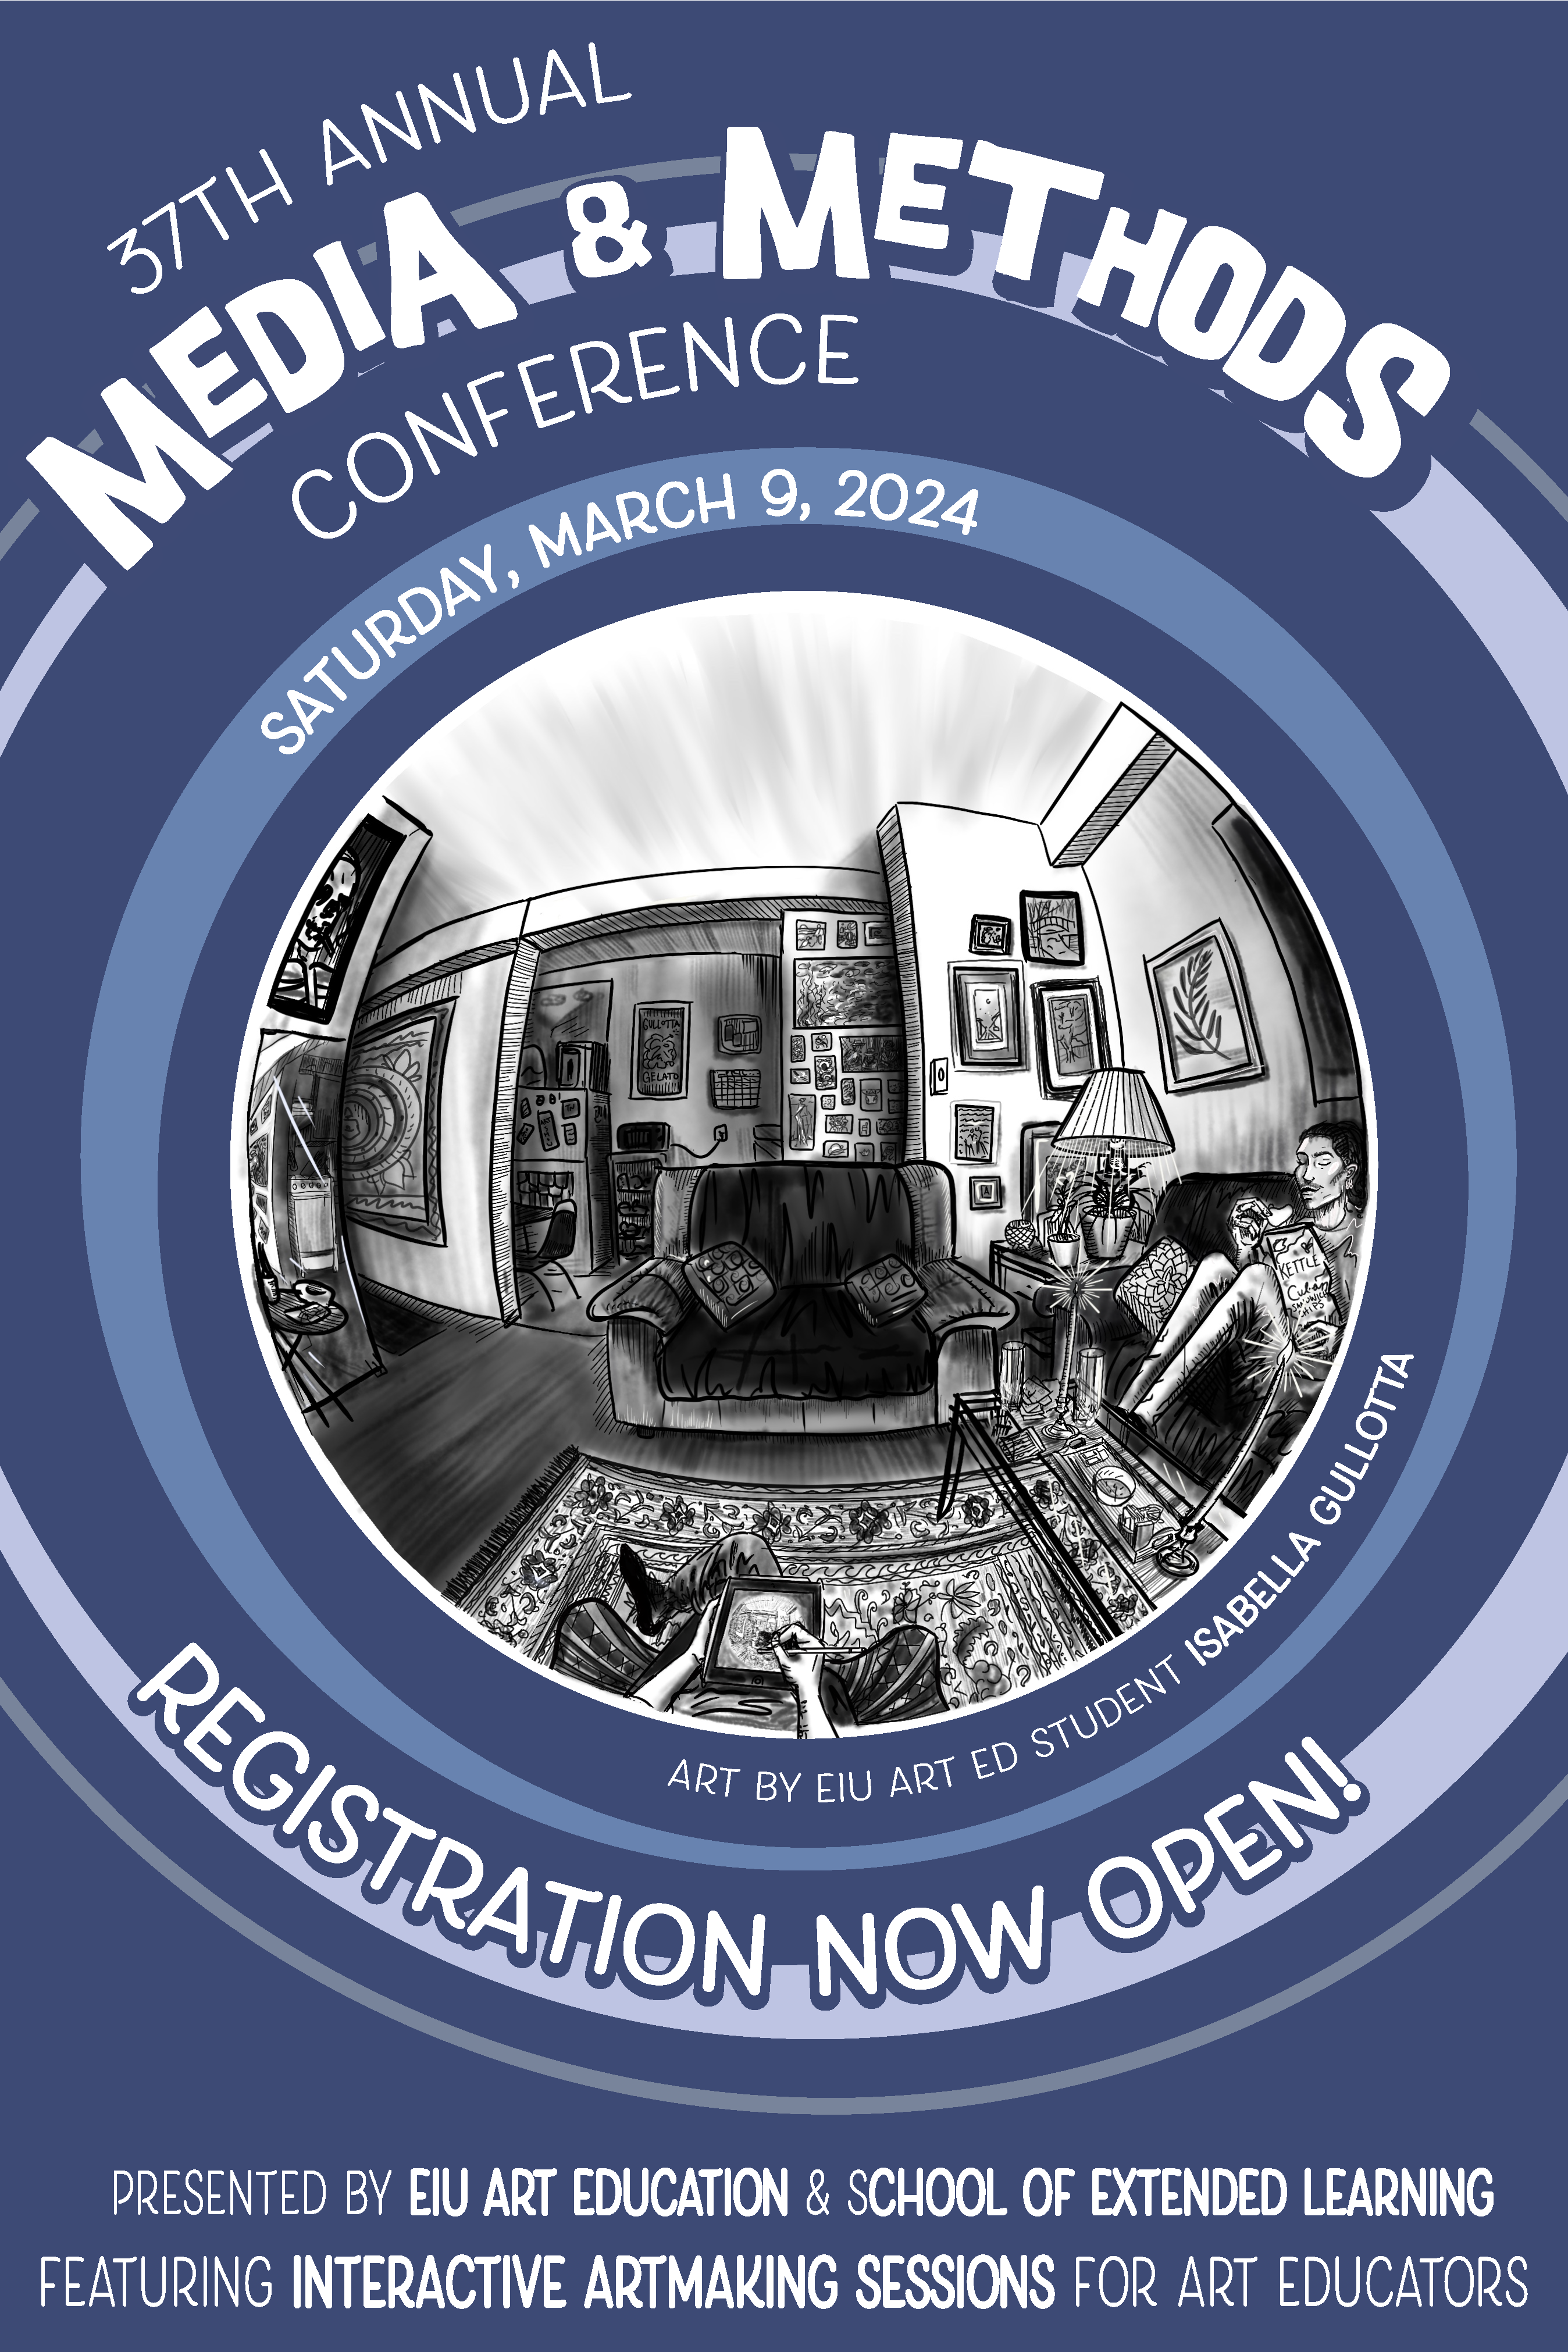 Decorative image for 37th Annual Media and Methods in Art Education Conference